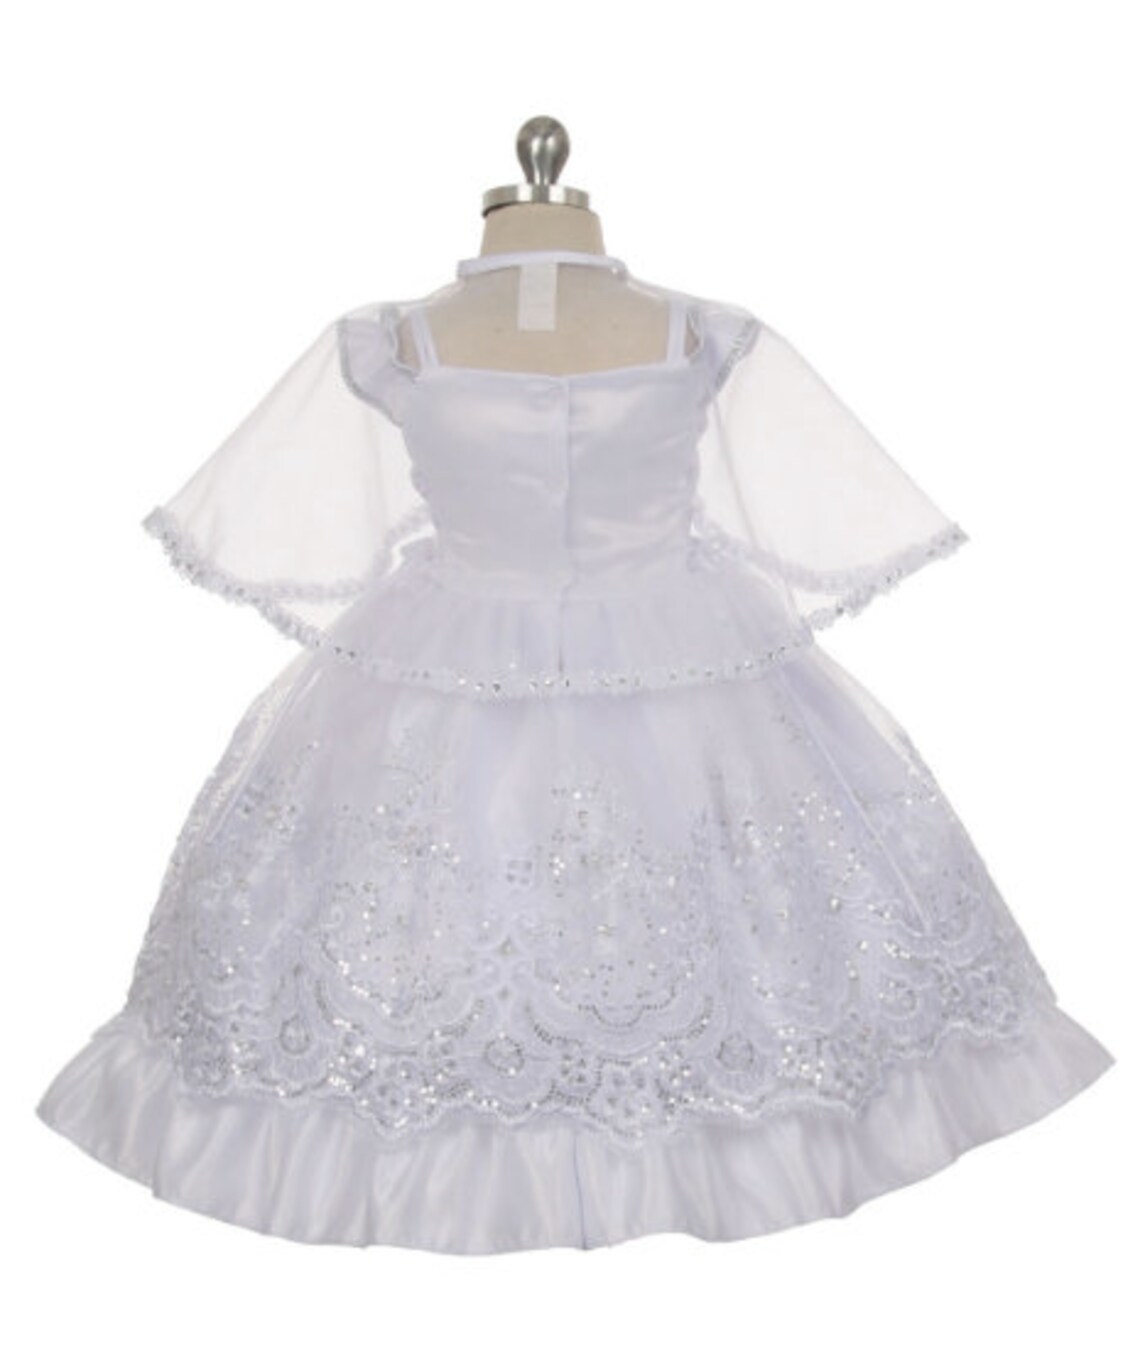 Baptism Dress With Virgin Mary Embroidered Christening Dress - Etsy